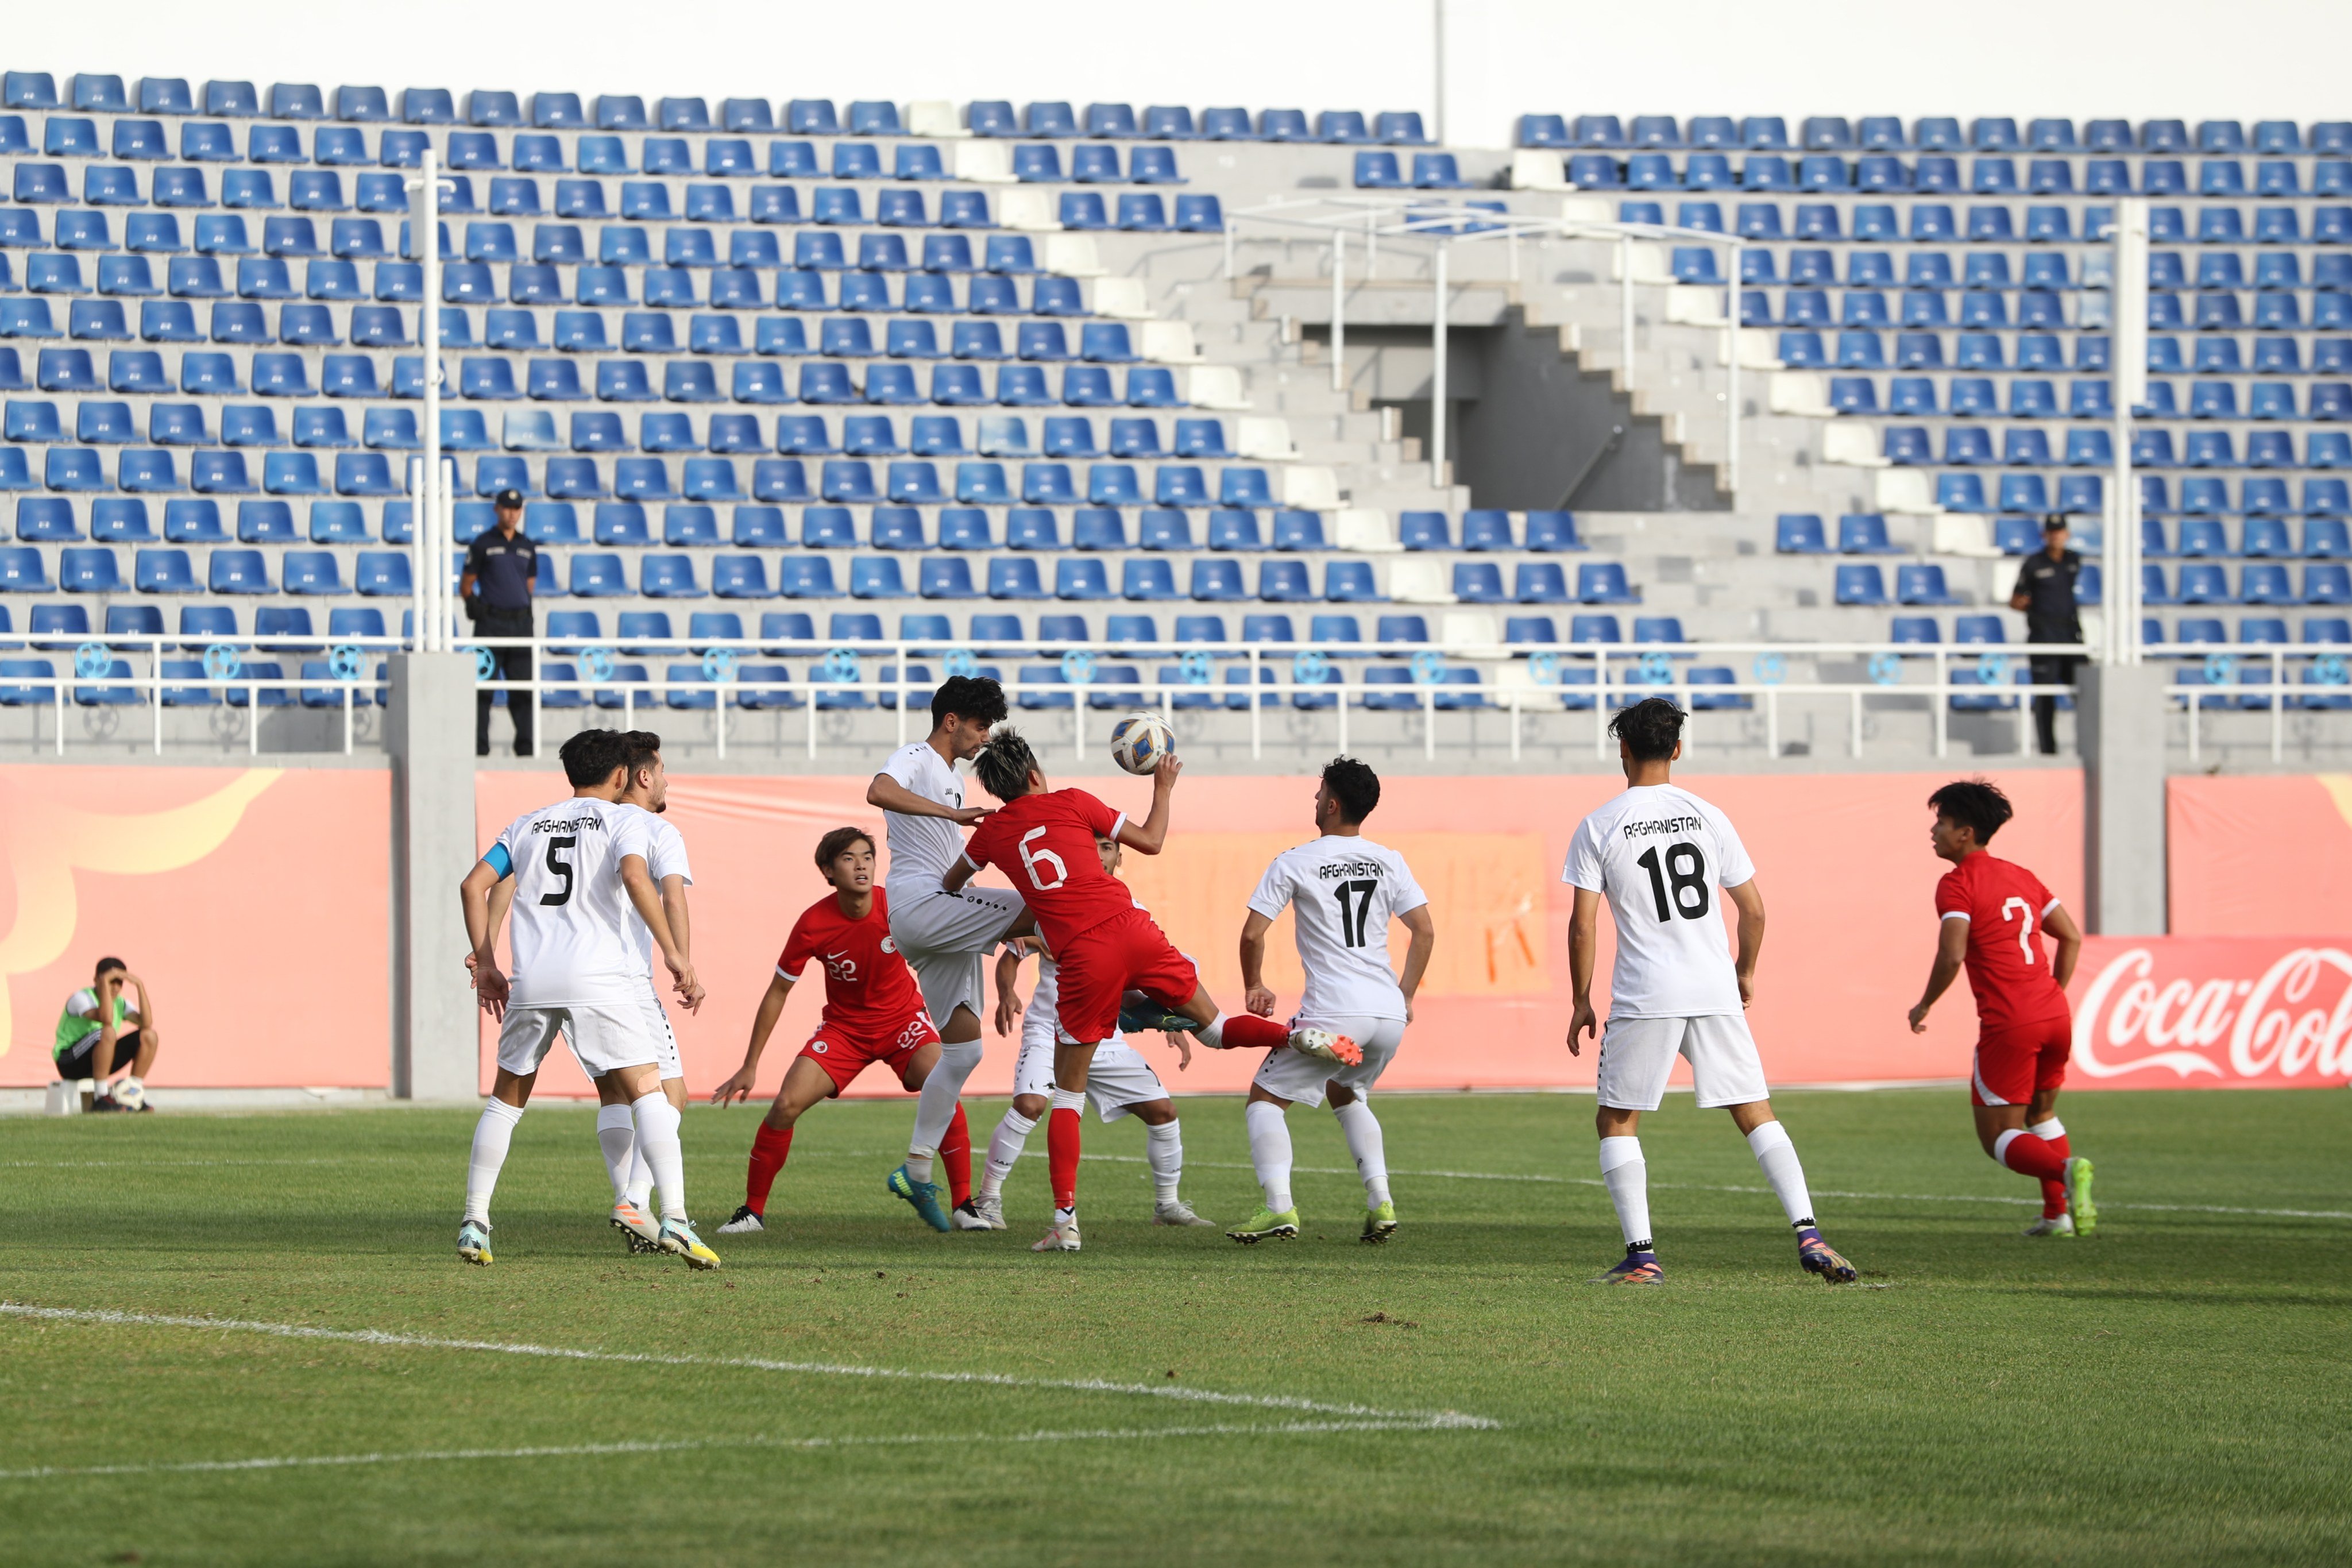 Hong Kong failed to score a single goal in three games in Uzbekistan, and conceded 13. Photo: HKFA